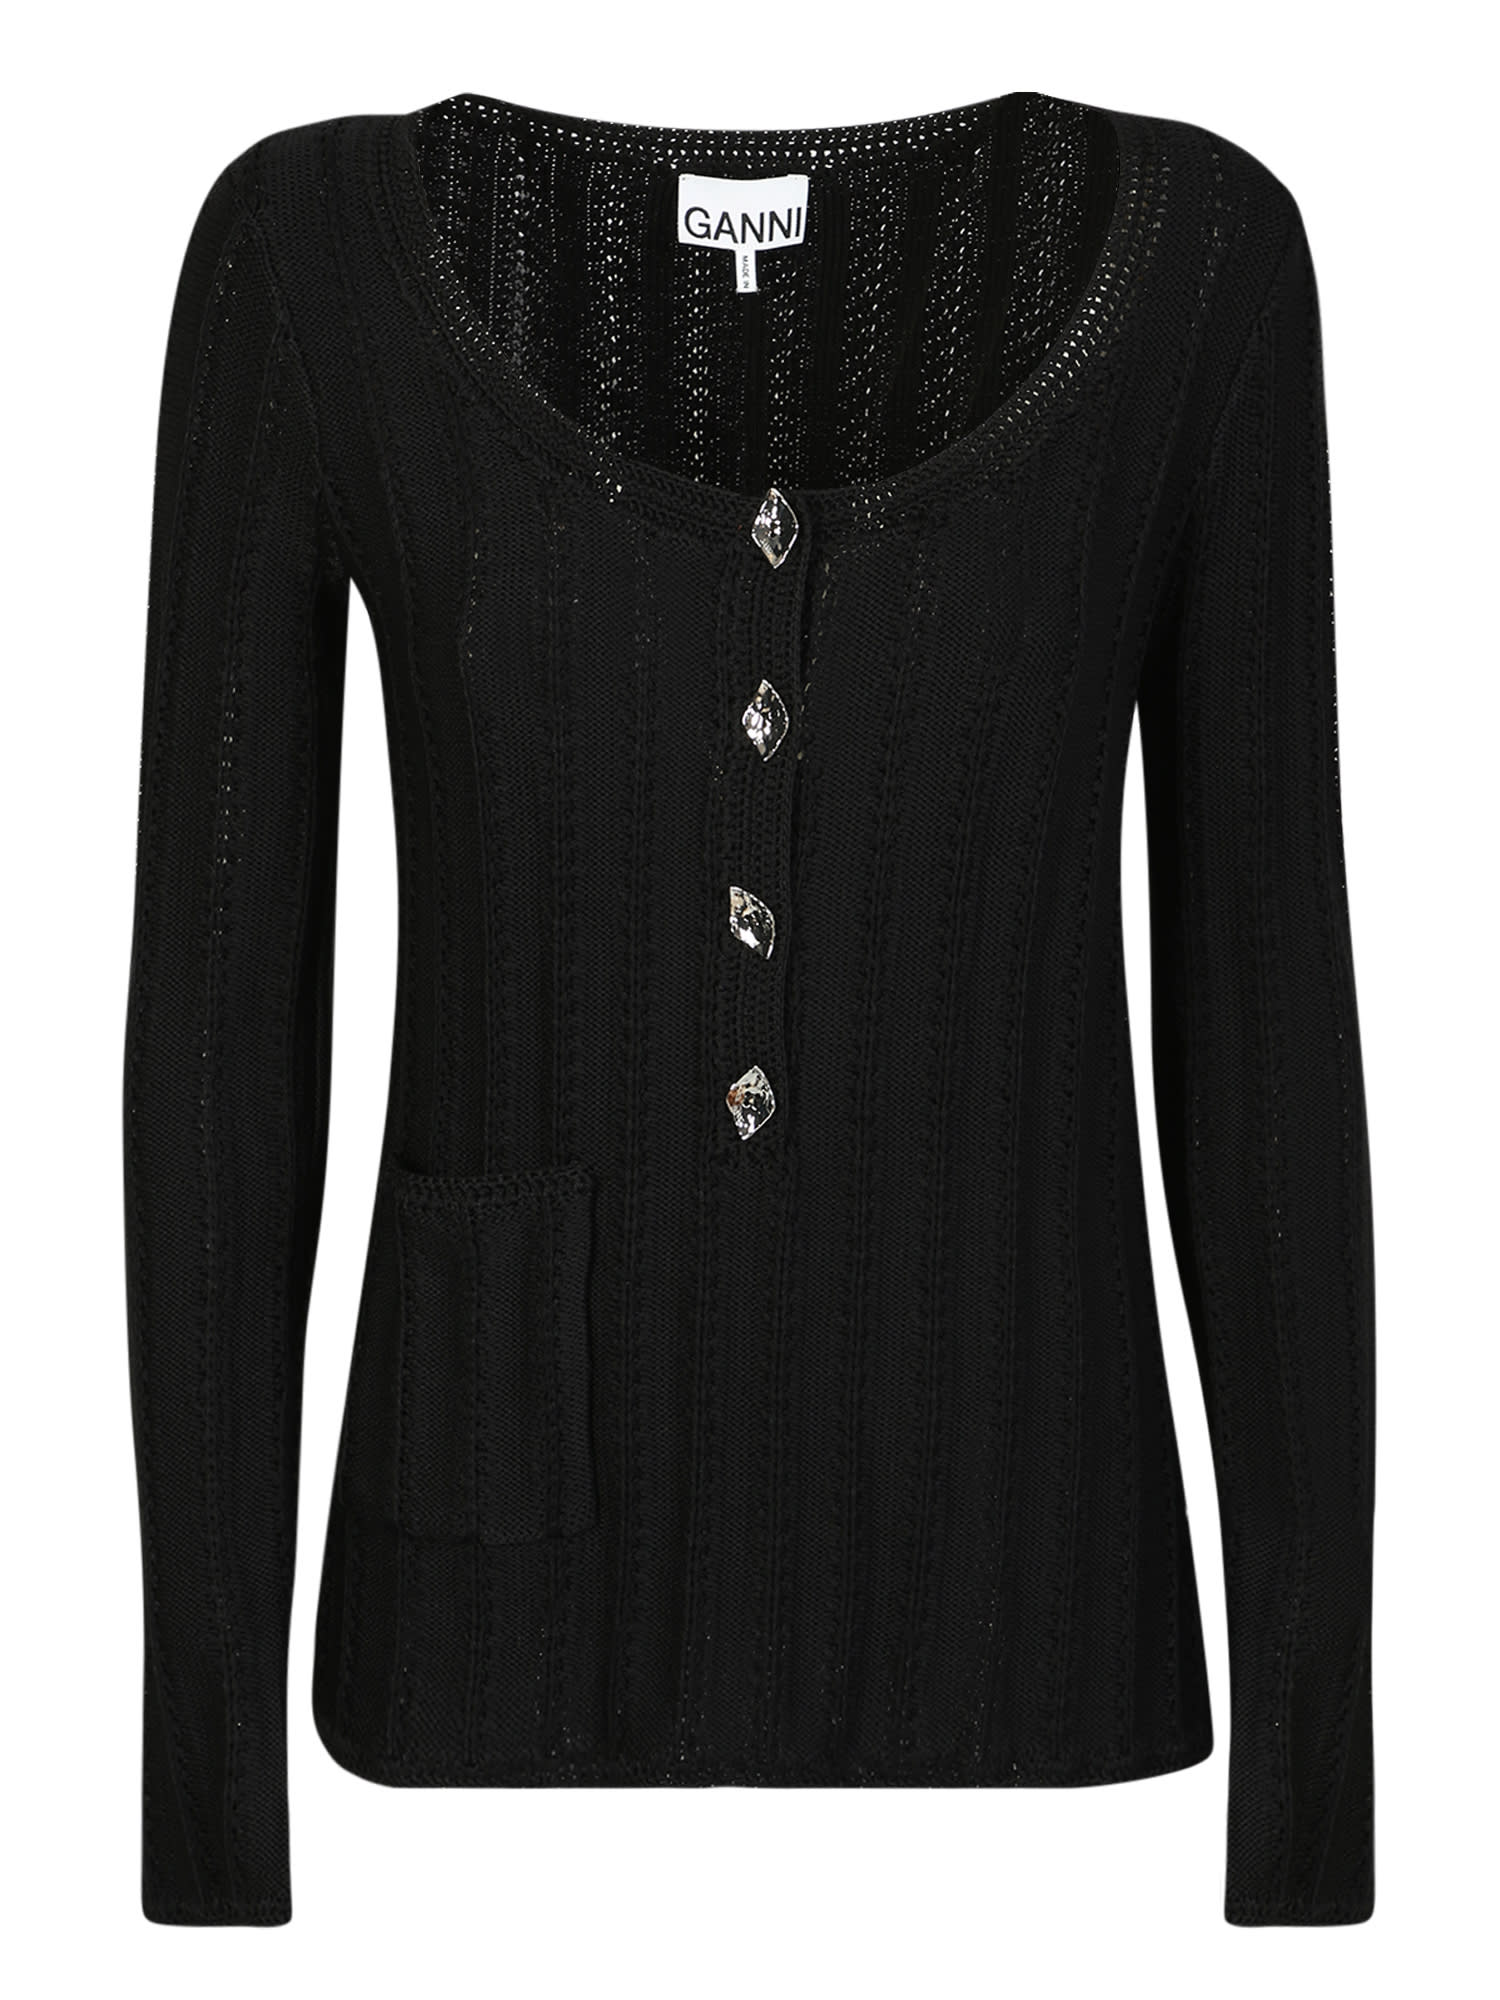 Ganni Displays Its Mastery Over Knitwear Staples With This Knitted Henley Top